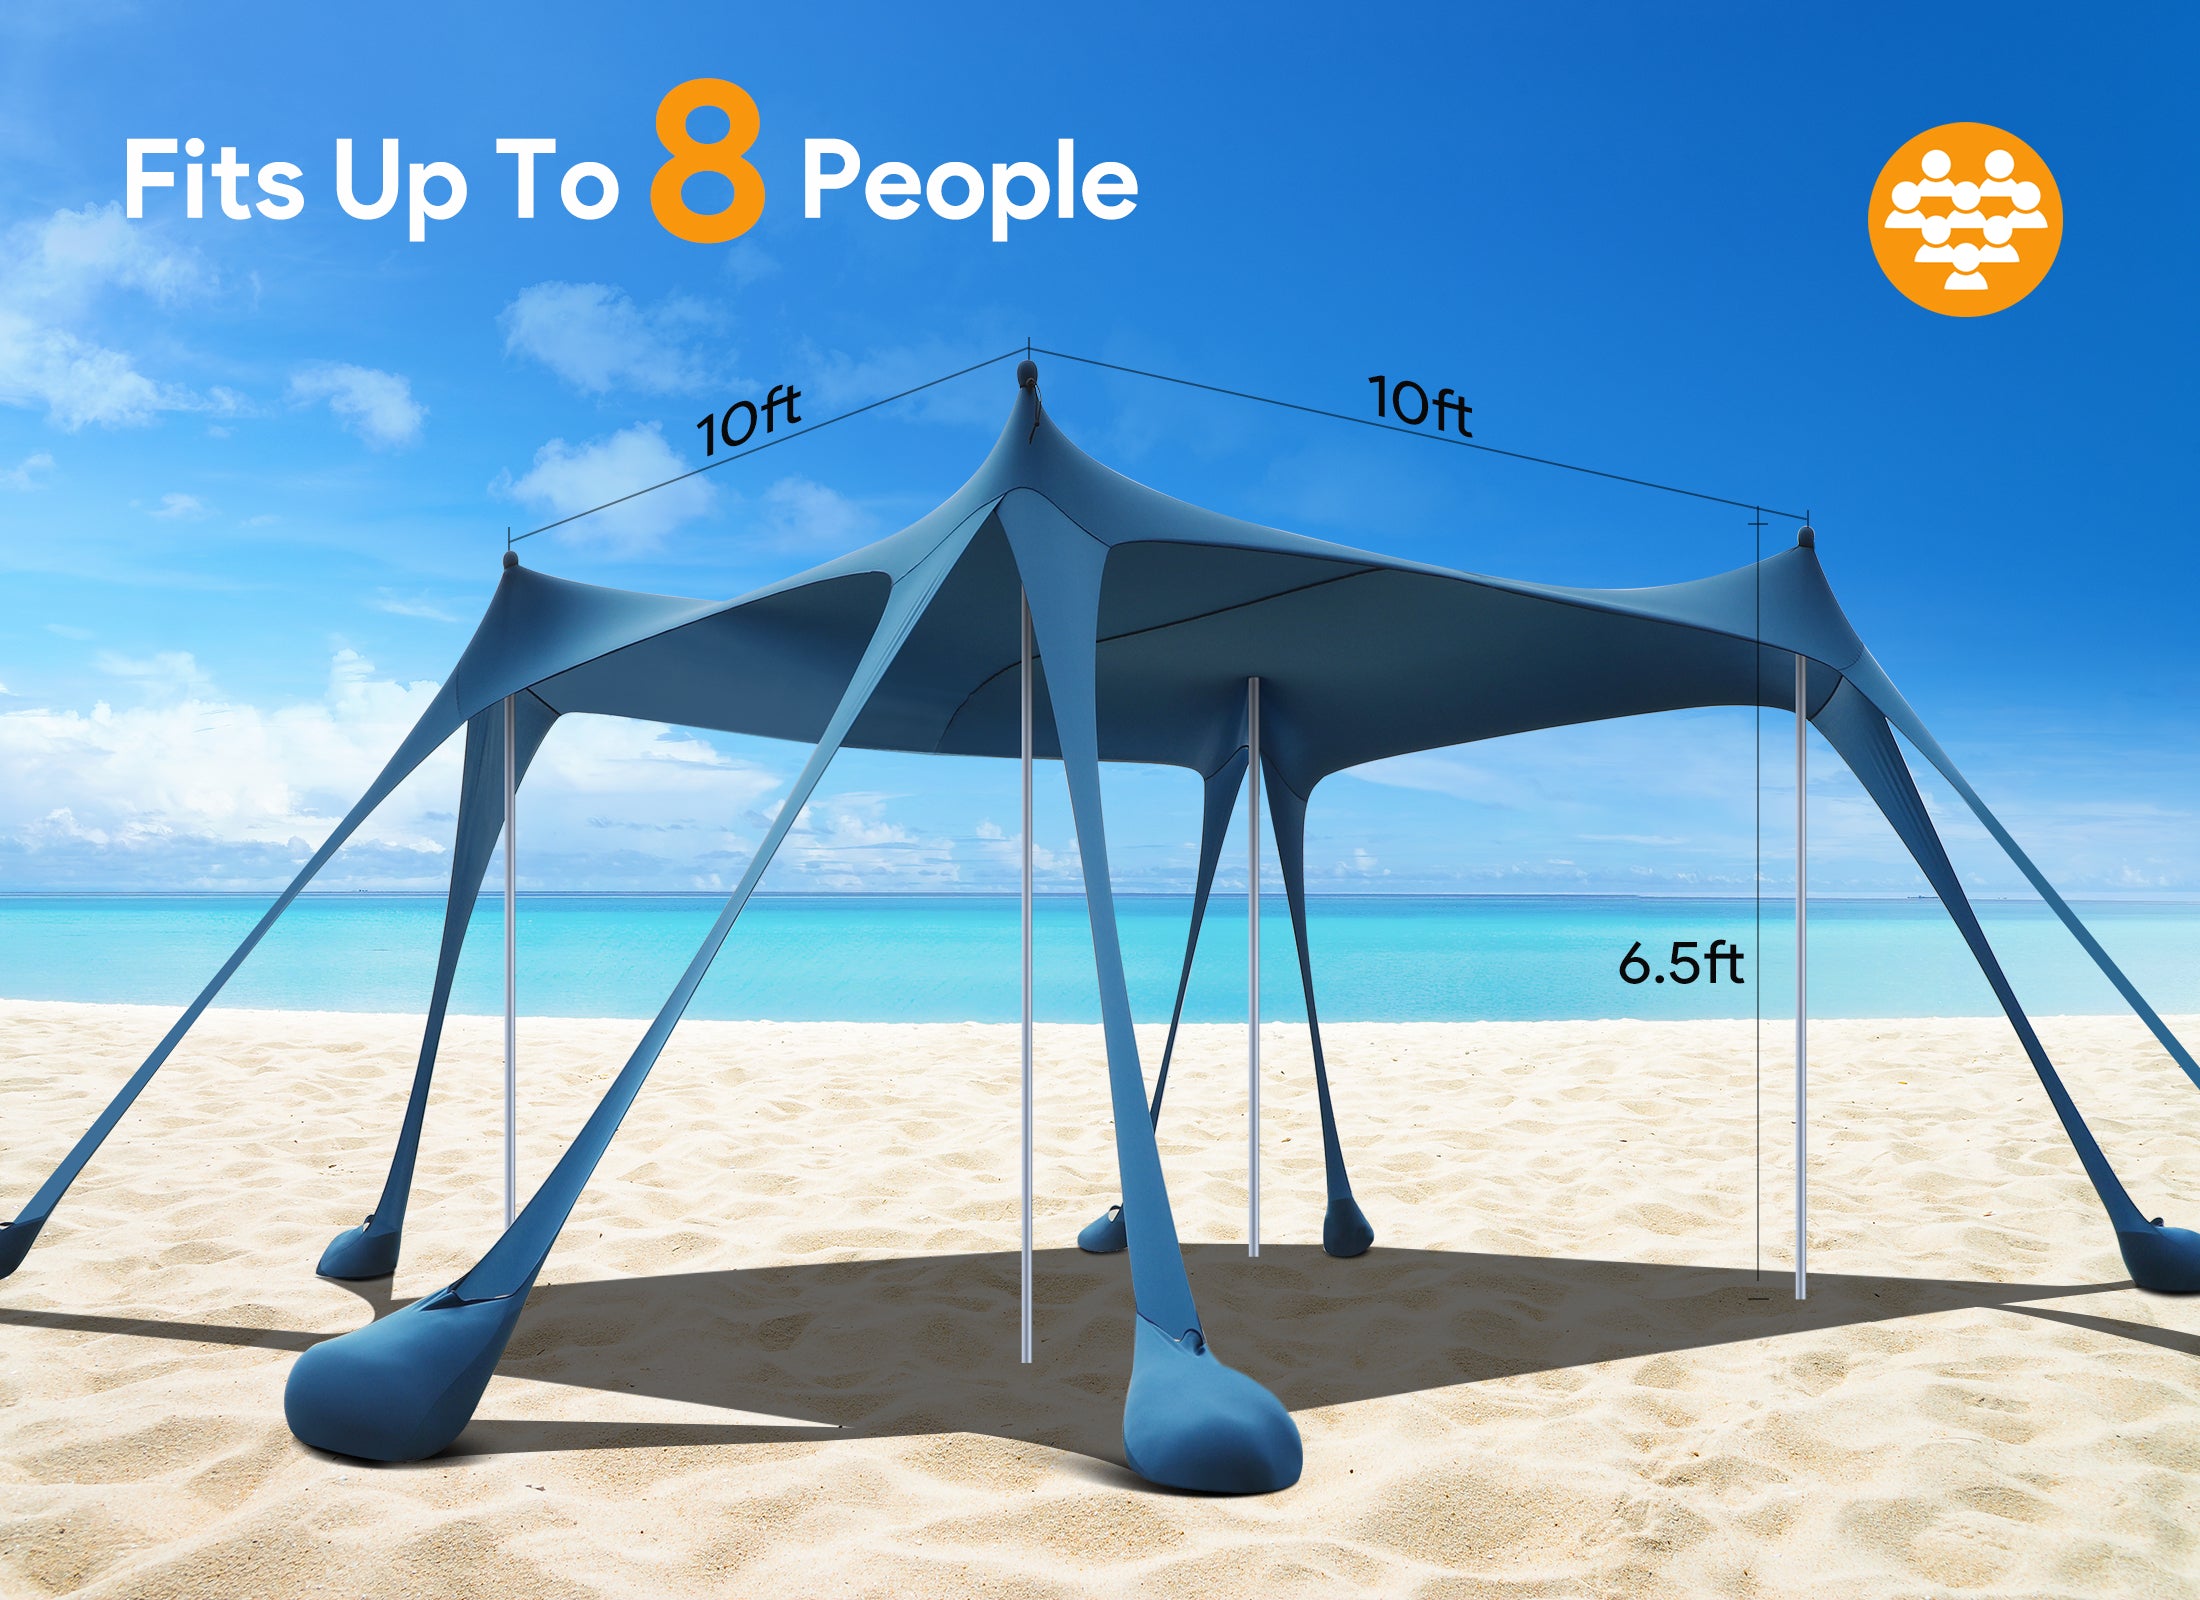 Sun Ninja Beach Tent Sun Shelter with UPF50+ Protection, Includes Sand Shovel, Ground Pegs and Stability Poles, Outdoor Pop Up Beach Shade Canopy